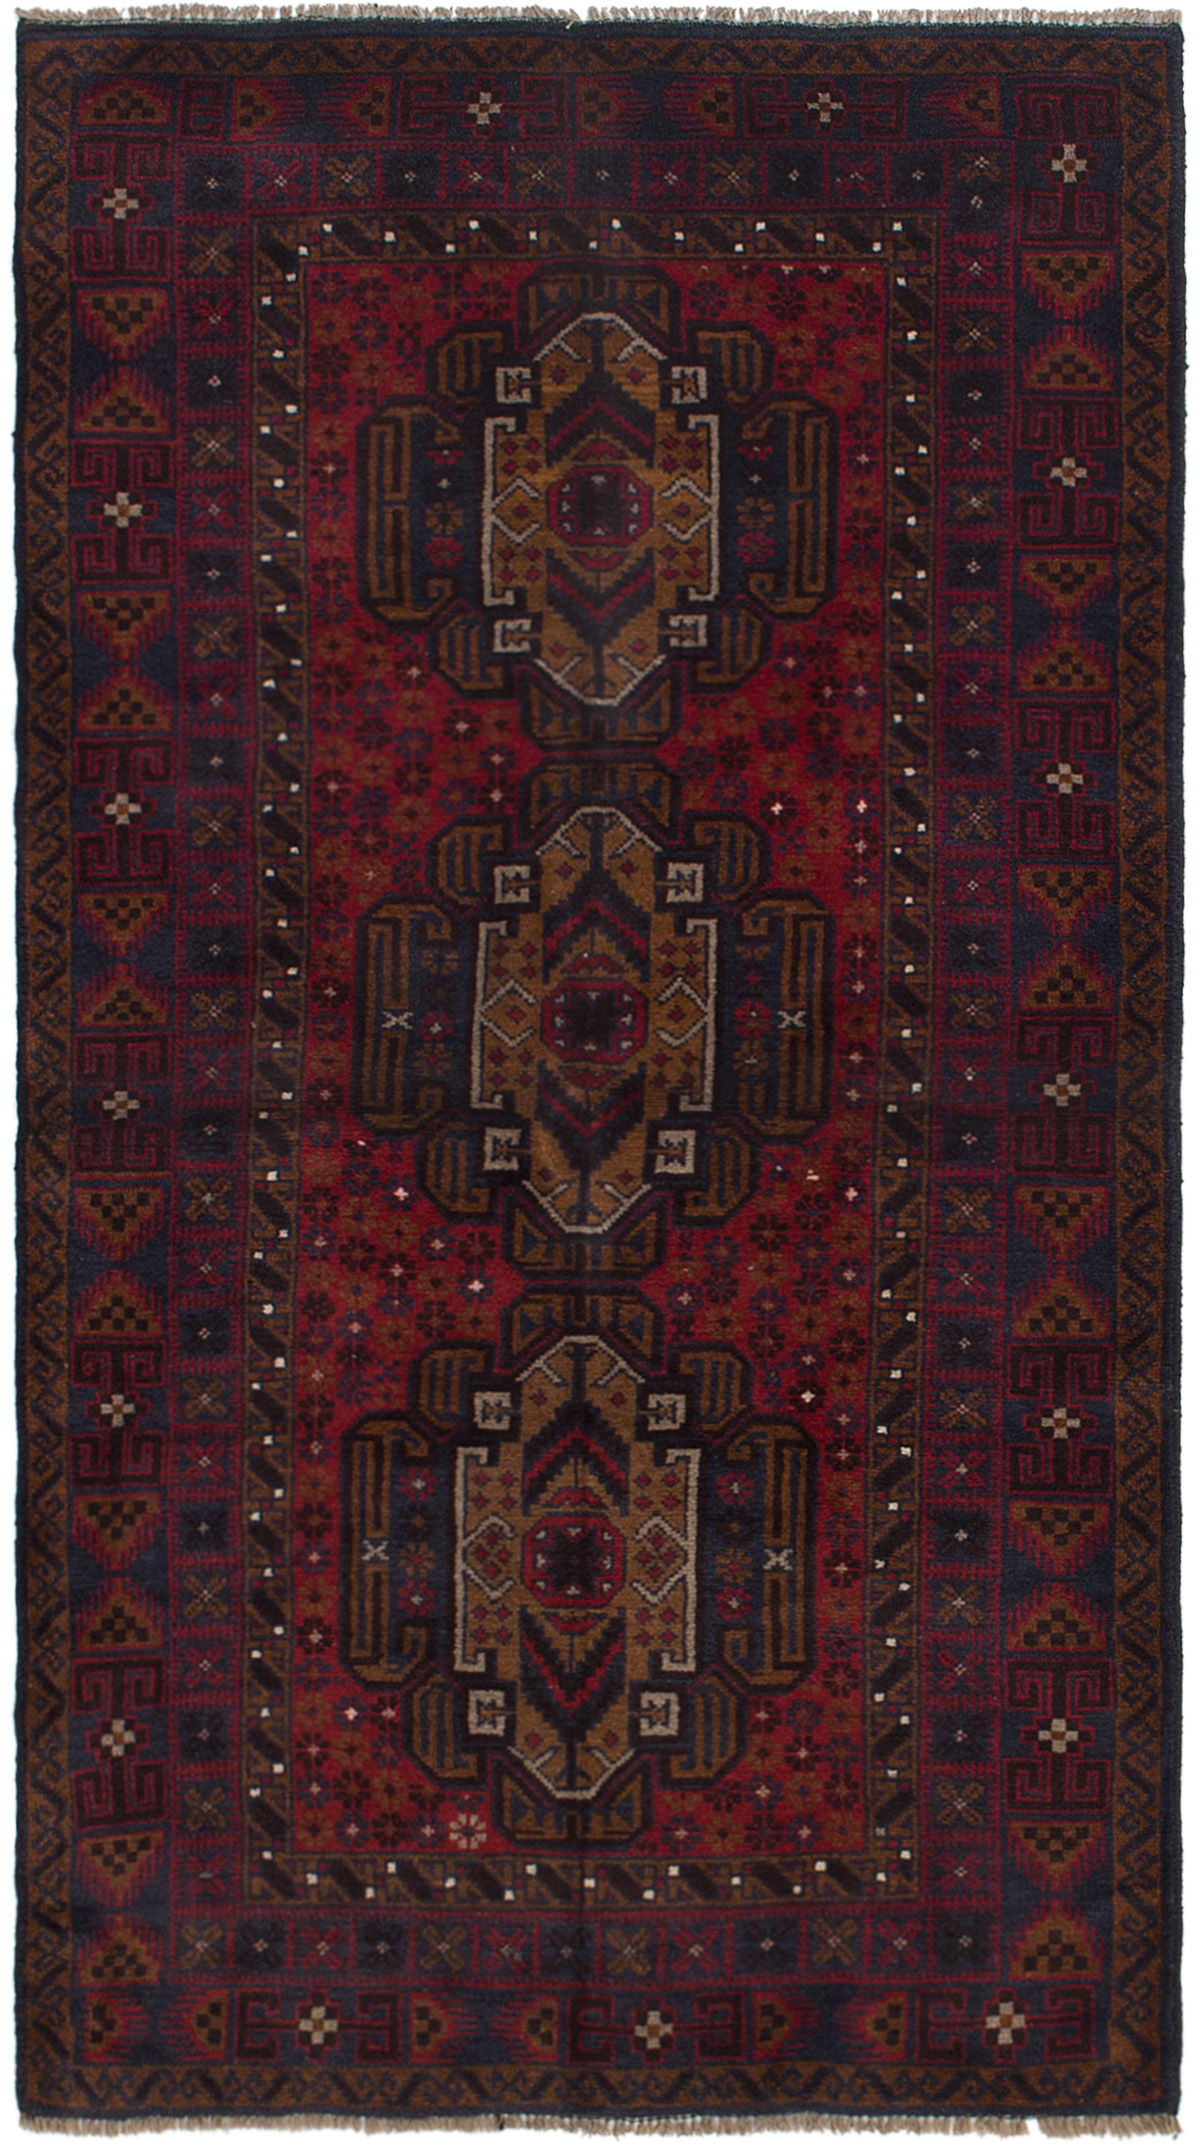 Hand-knotted Kazak Red Wool Rug 3'7" x 6'8"  Size: 3'7" x 6'8"  